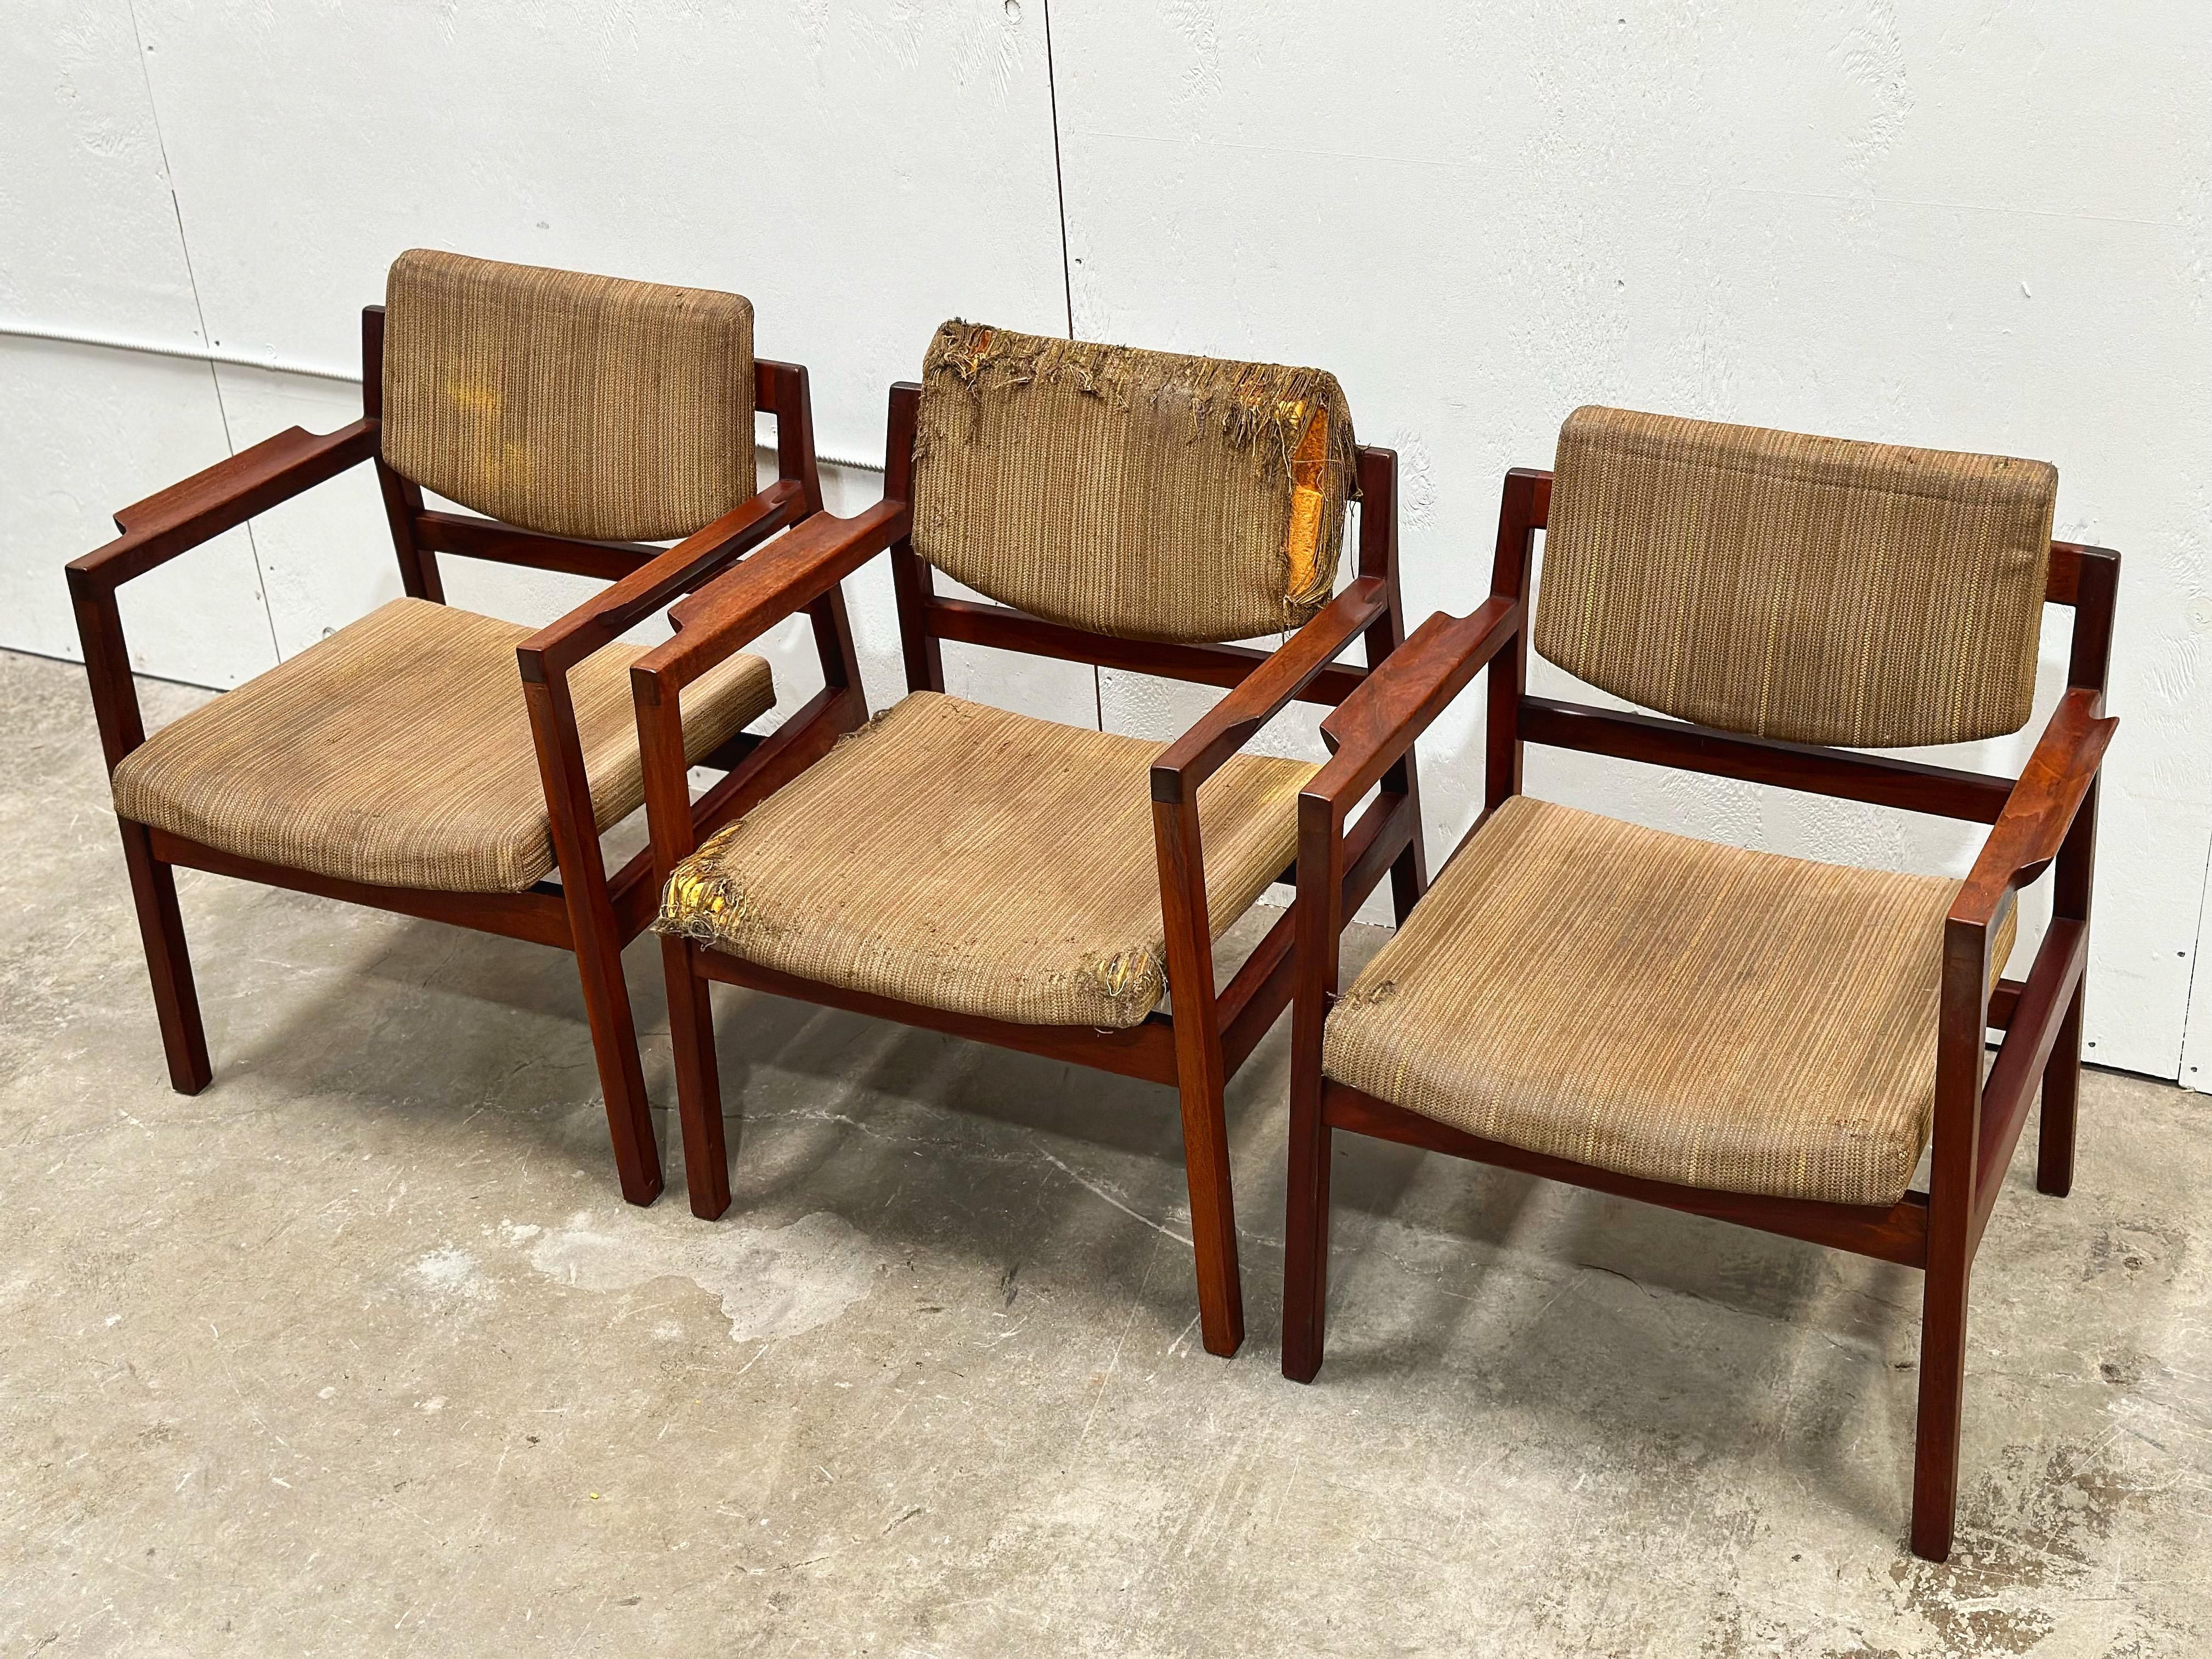 Set of eight (8) vintage mid century modern arm chairs by Jens Risom, circa late 1950s. Model C-170 in solid American black walnut with sculpted flared armrests. Stout and sturdy American craftsmanship with clean modern Danish modern design. 

The